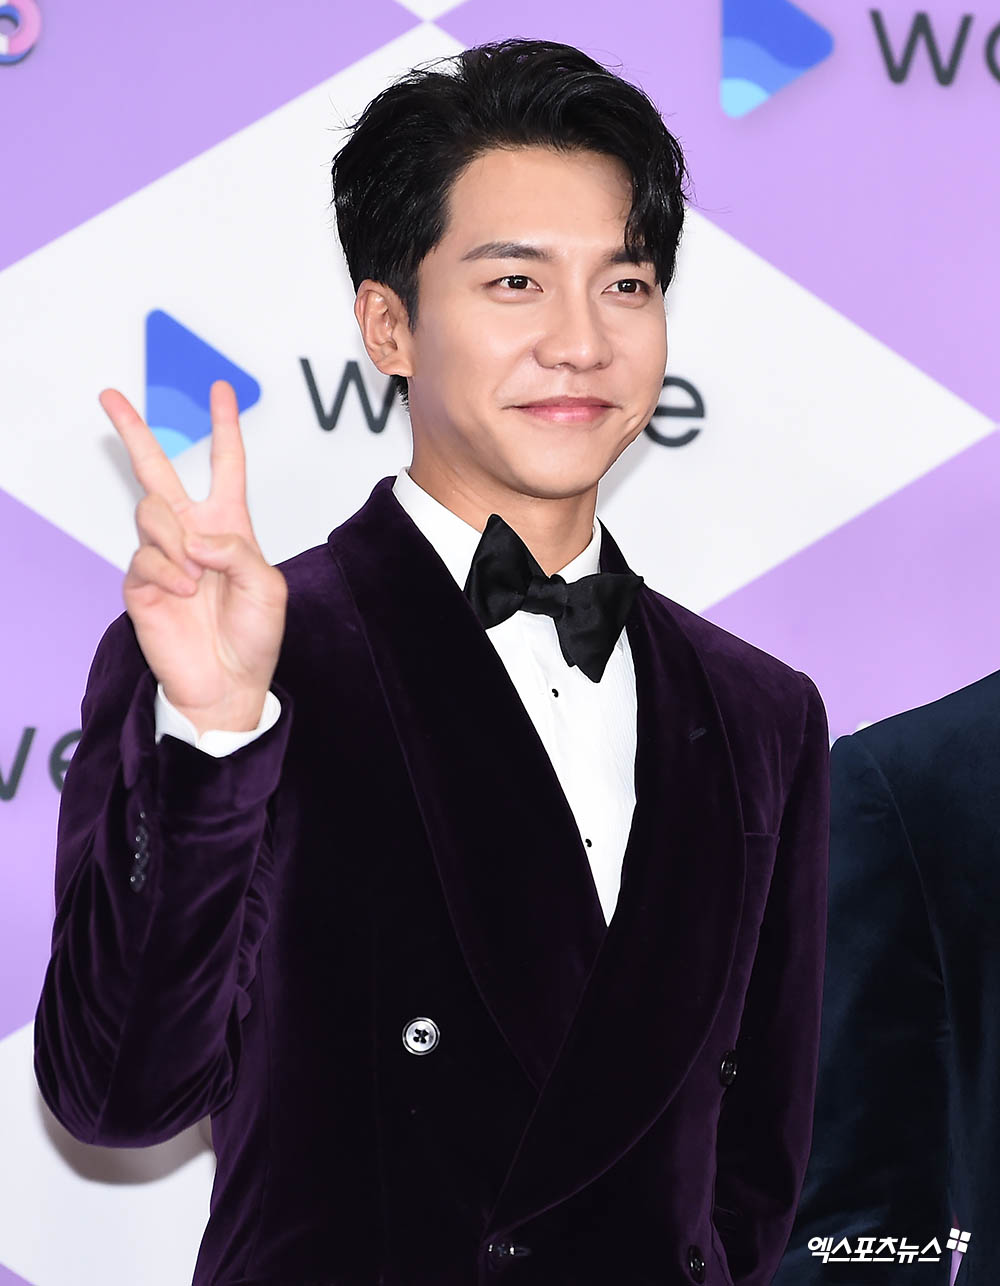 Actor and singer Lee Seung-gi, who attended the 2019 SBS Entertainment Awards held at SBS Prism tower in Sangam-dong, Seoul, is stepping on the red carpet on the afternoon of the 28th.